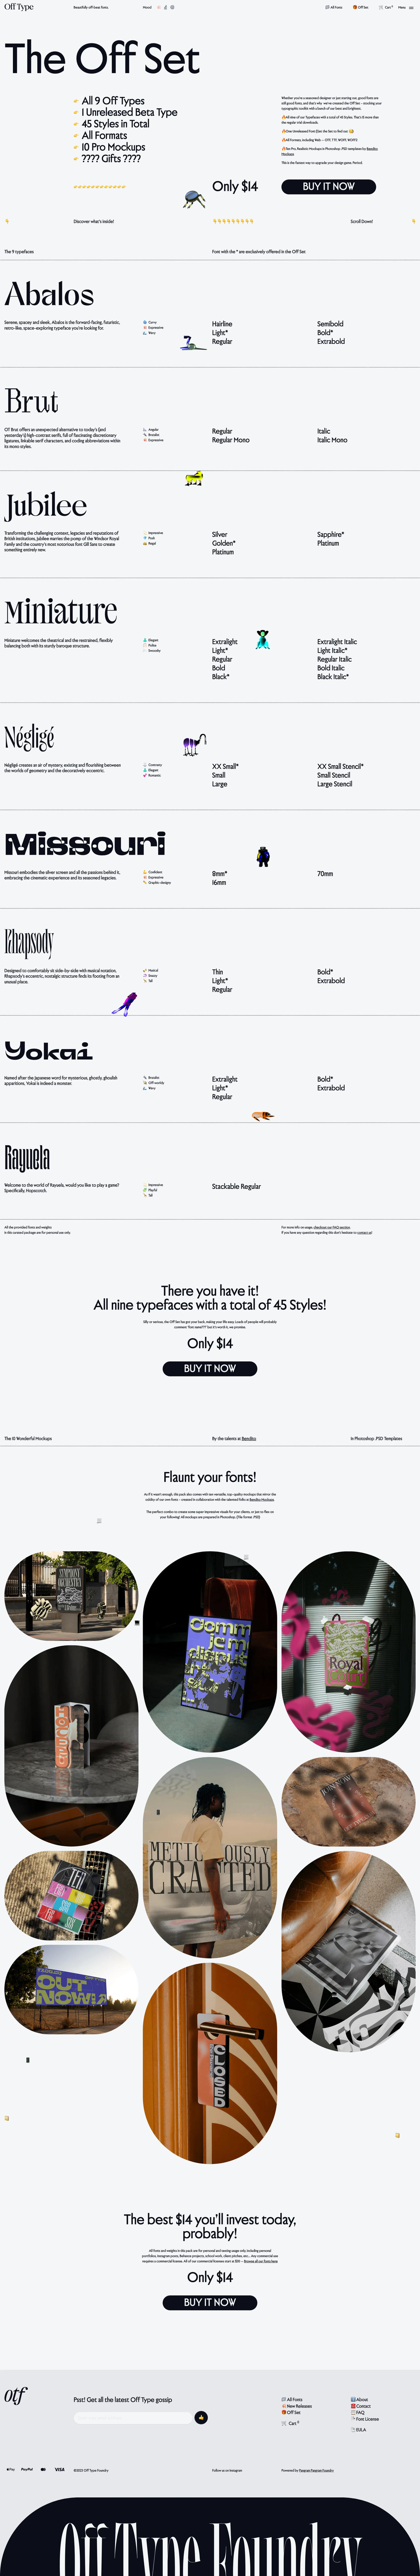 Off Type Foundry Landing Page Example: Welcome to Off Type! A place to explore beautifully off-beat fonts that are really really well made, meaning that whatever the context you put them in, they’ll work as hard as they look wonderfully weird. All Fonts are Free to try!